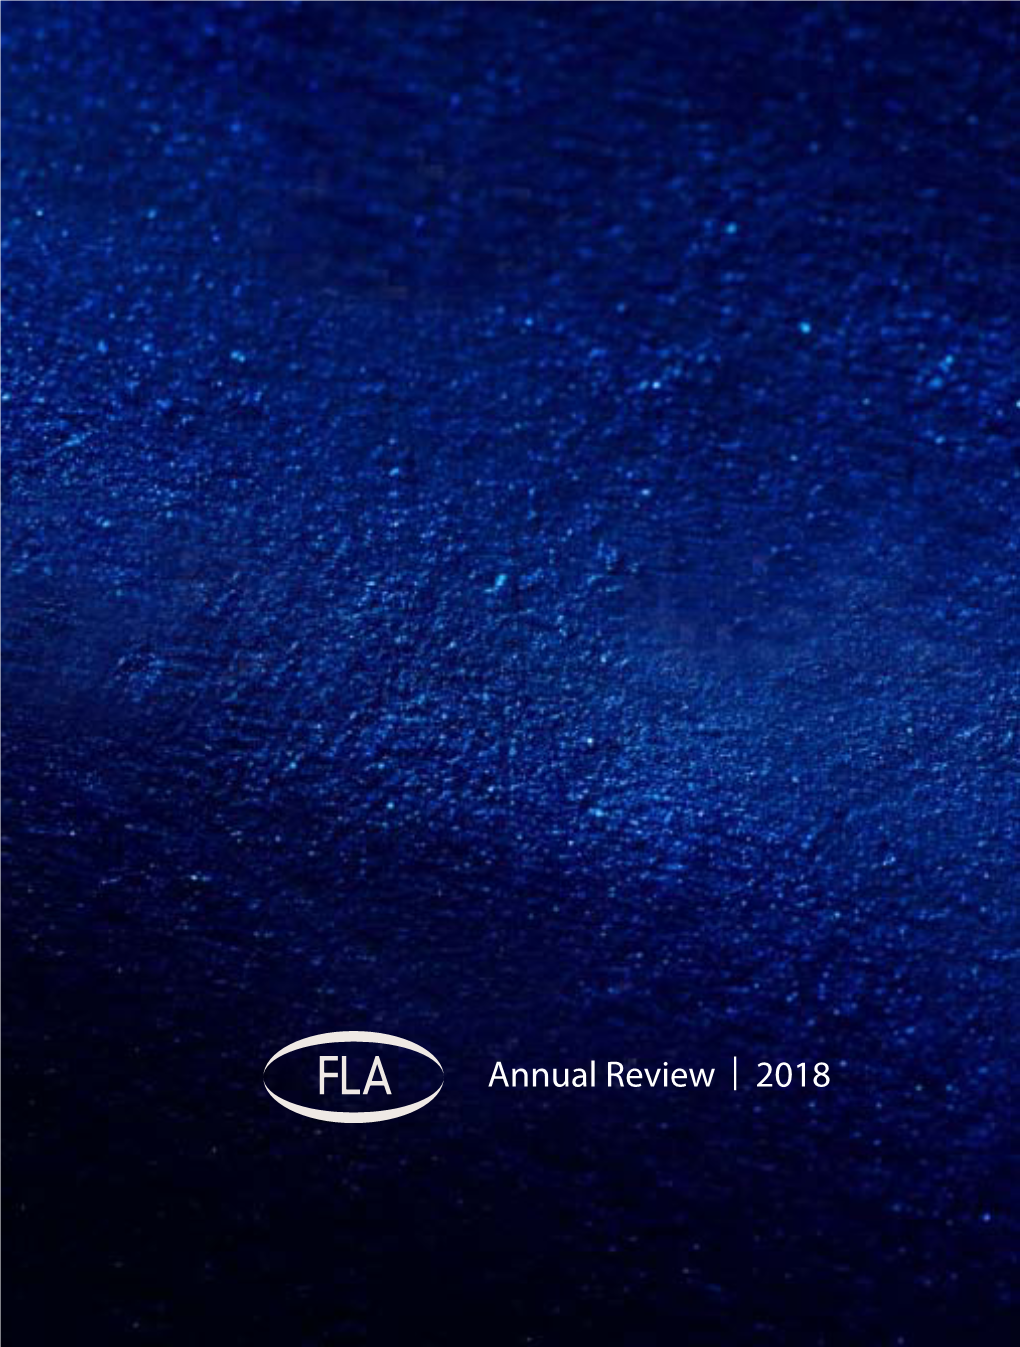 FLA Annual Review 2018